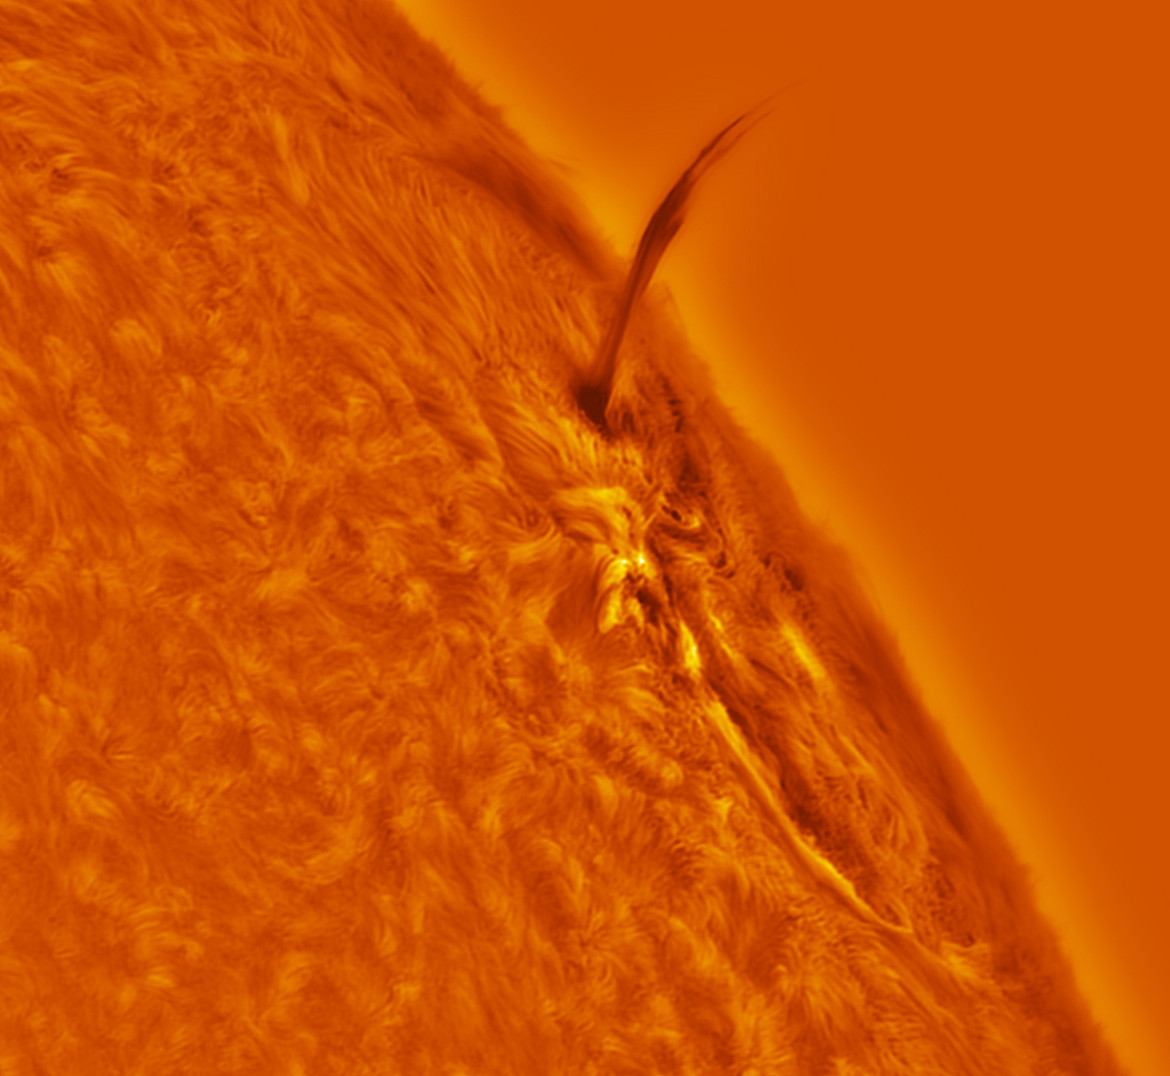 fot. Stuart Green, "Coloured Eruptive Prominence", 2. miejsce w kategorii Our Sun / Insight Astronomy Photographer of the Year 2018